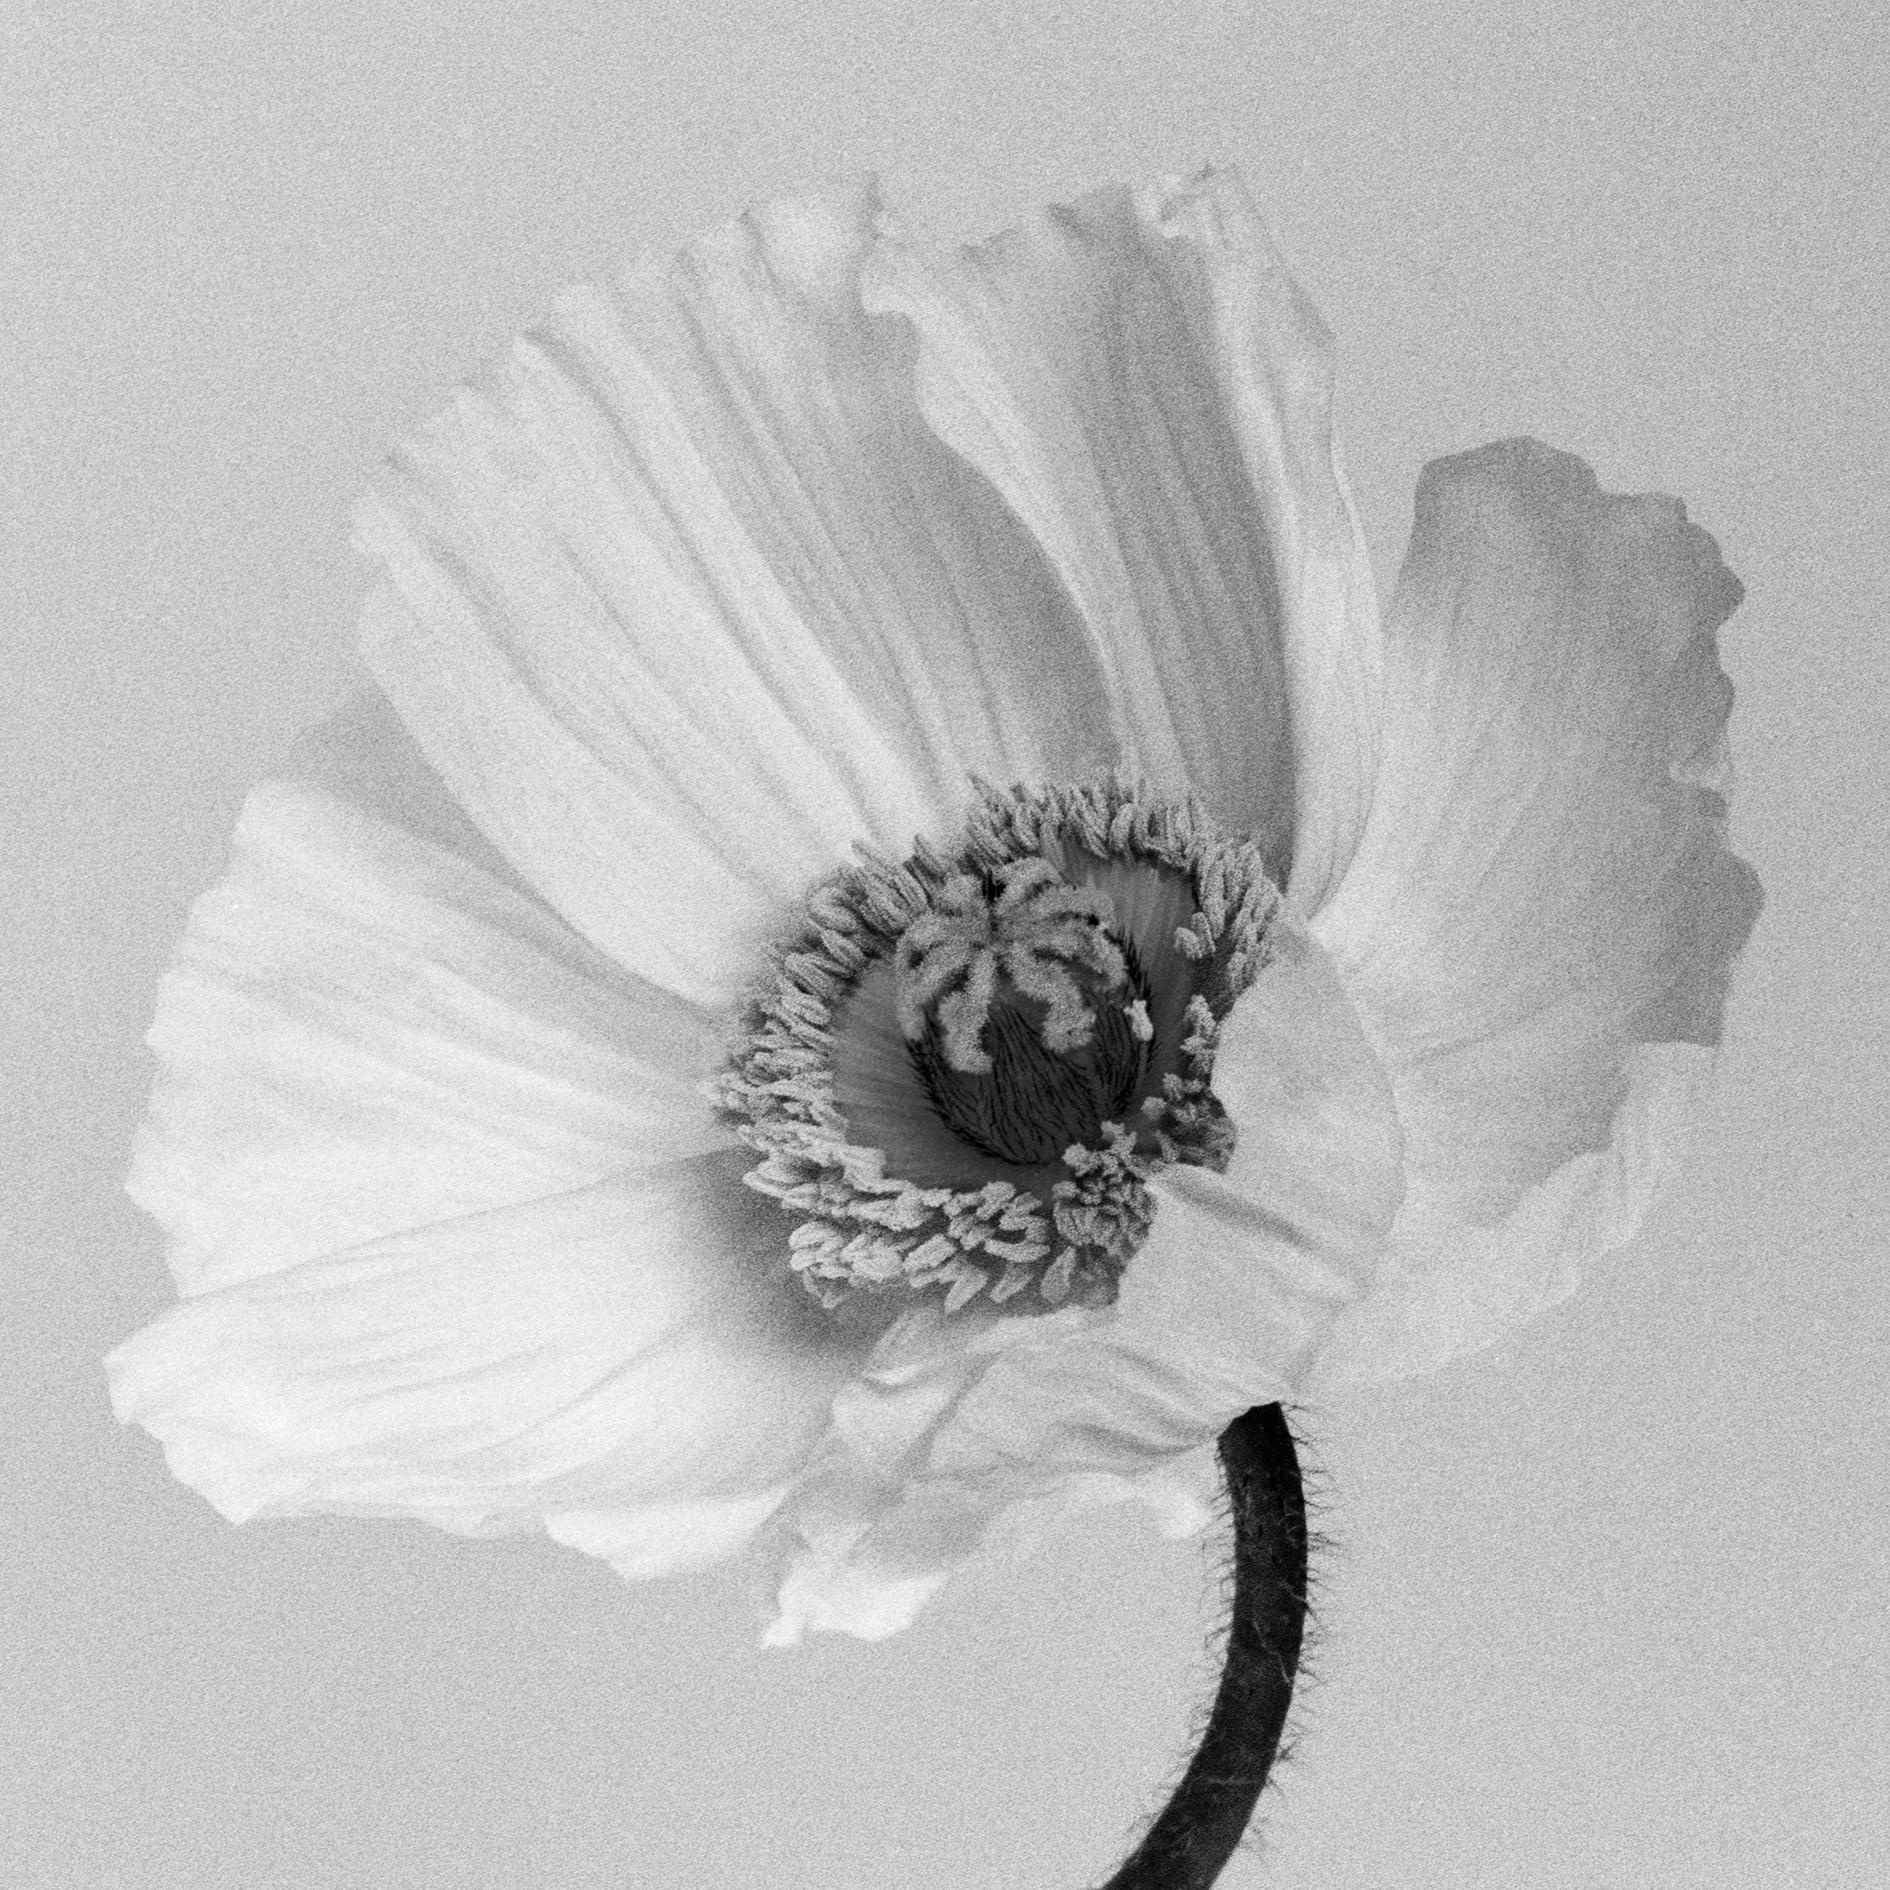 Ugne Pouwell Black and White Photograph - Poppy no.2 - Analogue black and white floral photography, edition of 20